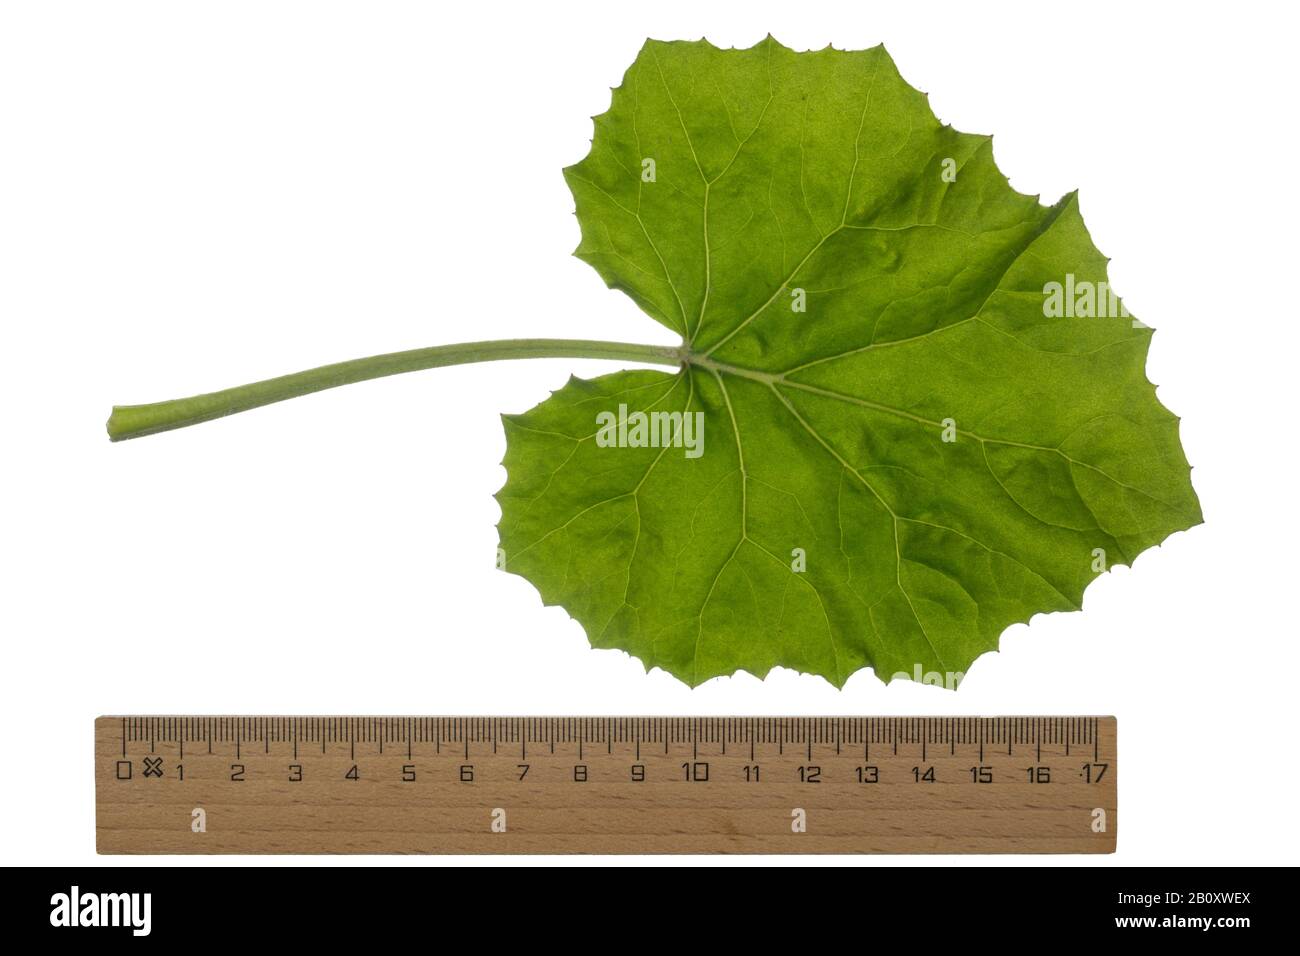 colts-foot, coltsfoot (Tussilago farfara), leaf, cutout with ruler, Germany Stock Photo